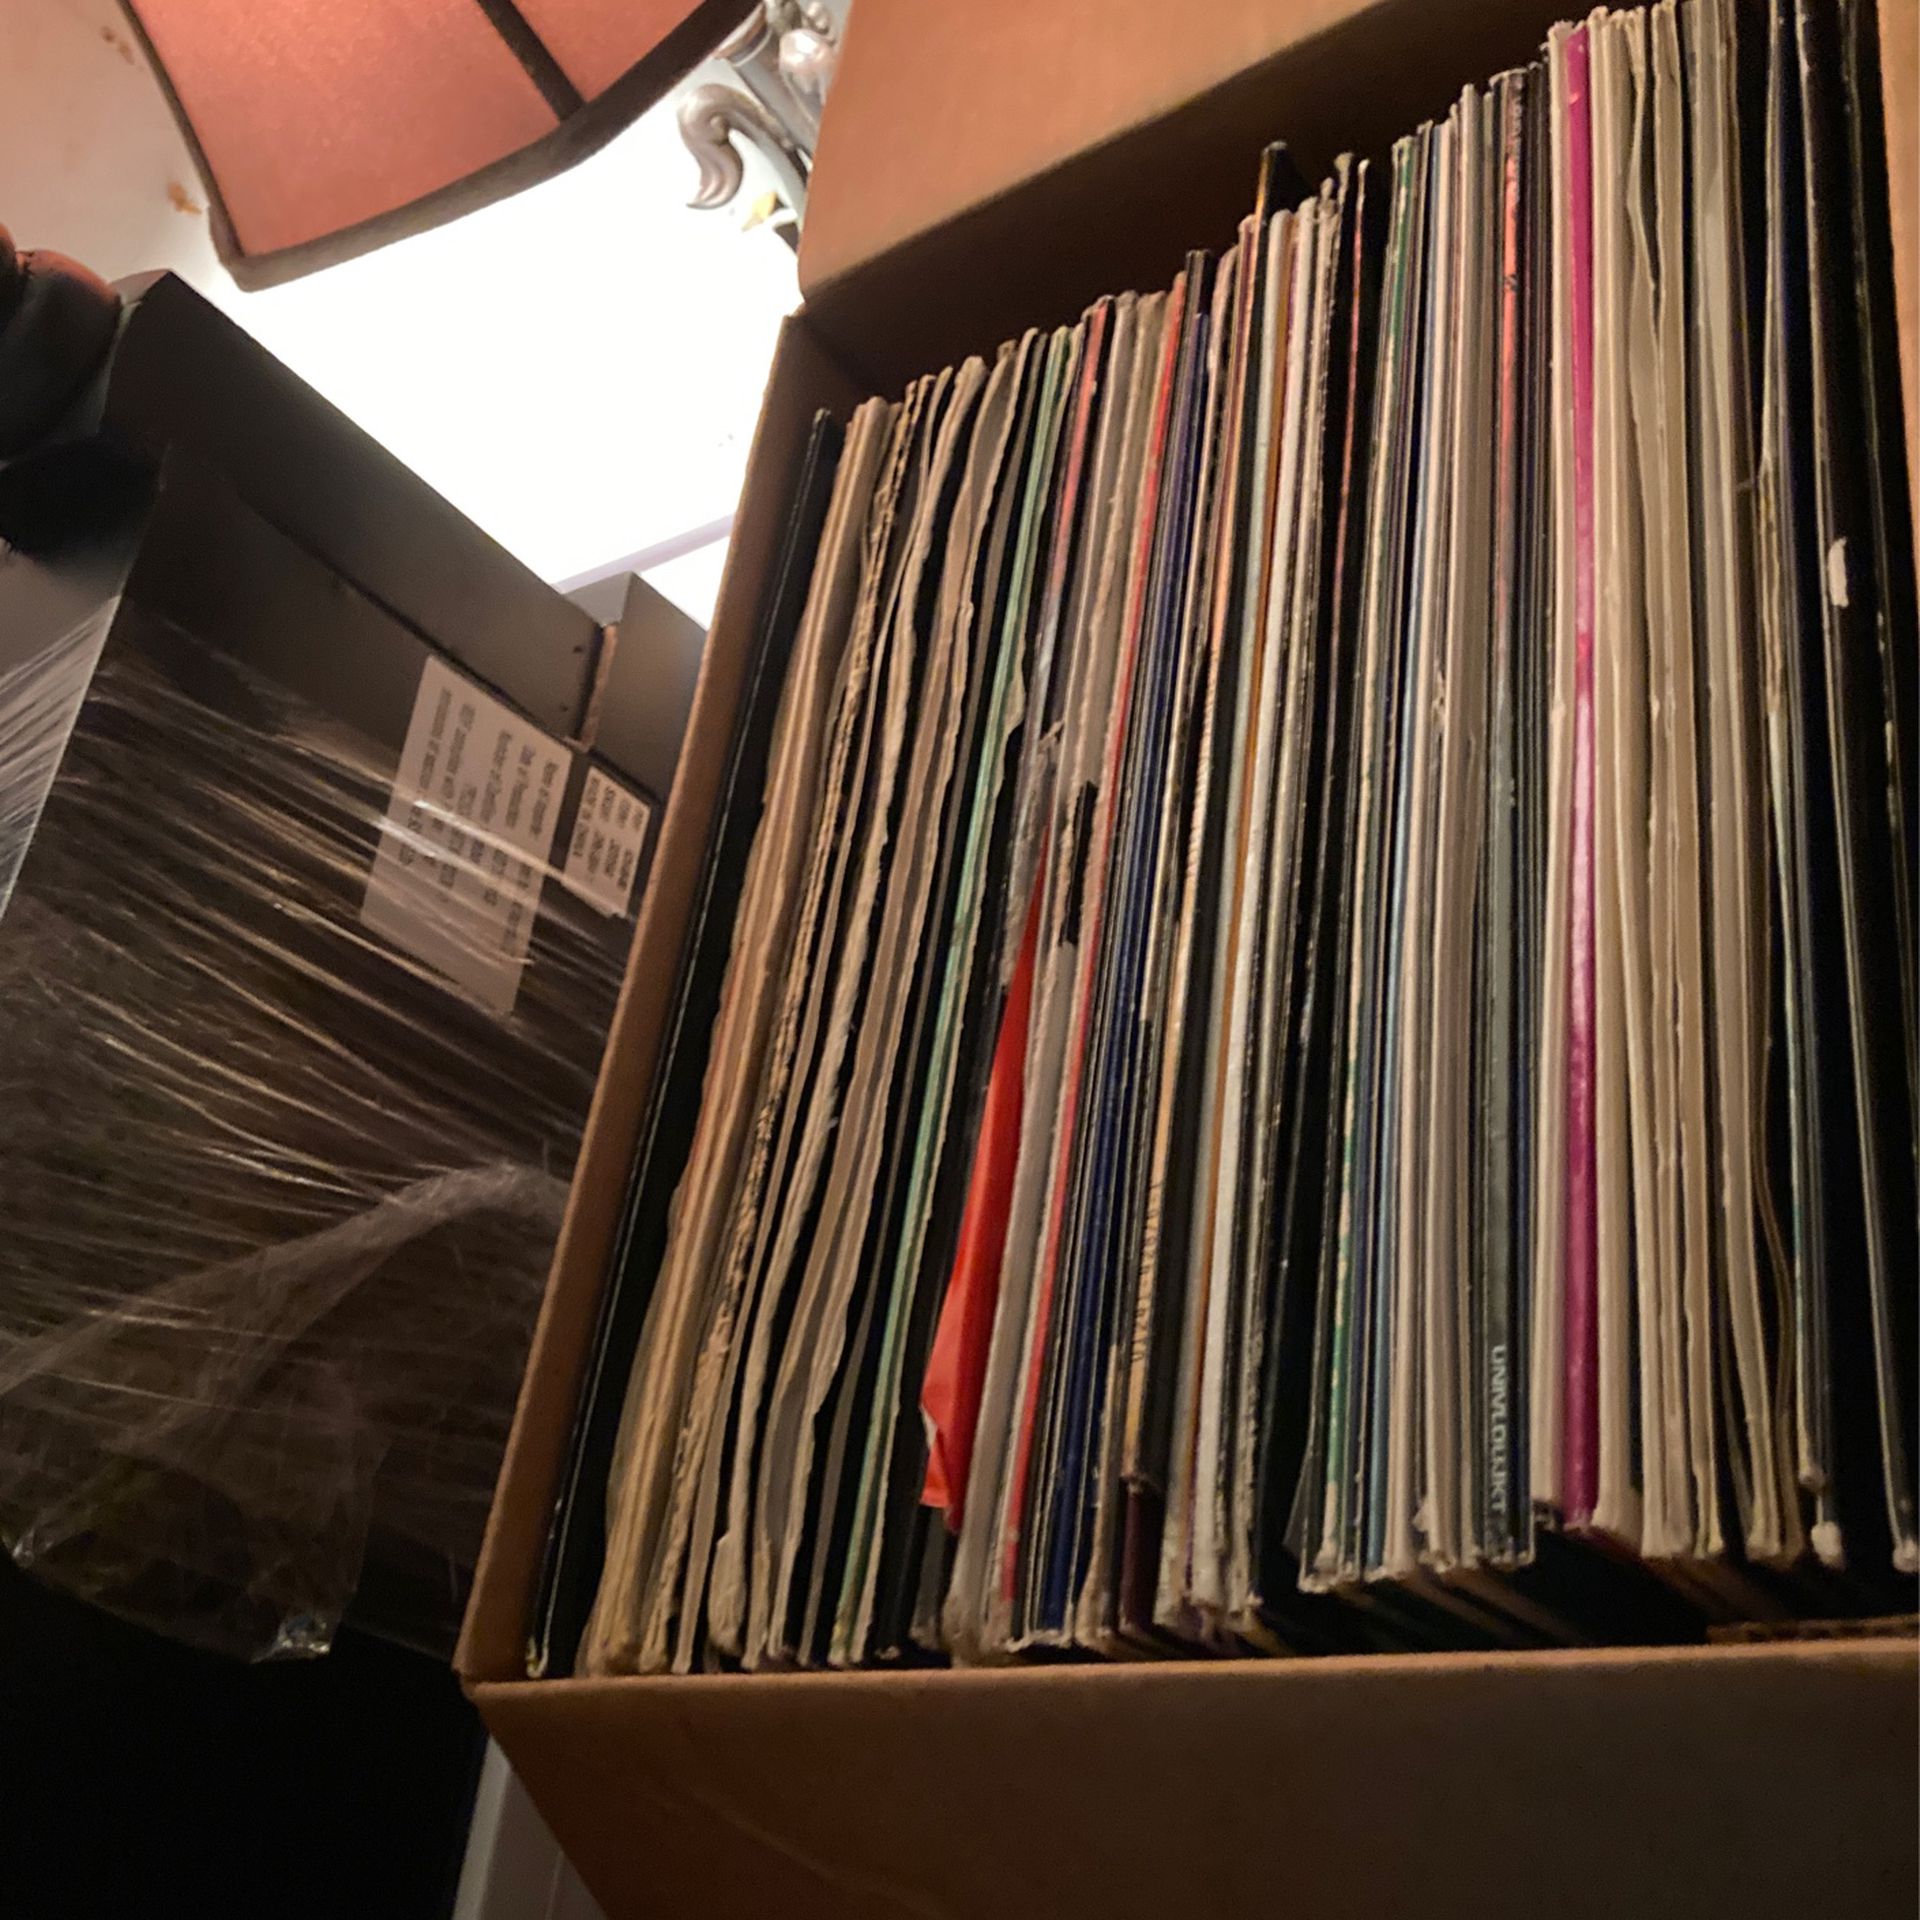 Boxes Of Records (Vinyl) $10 each or accepting offers for the whole box. See Photos for inventory.